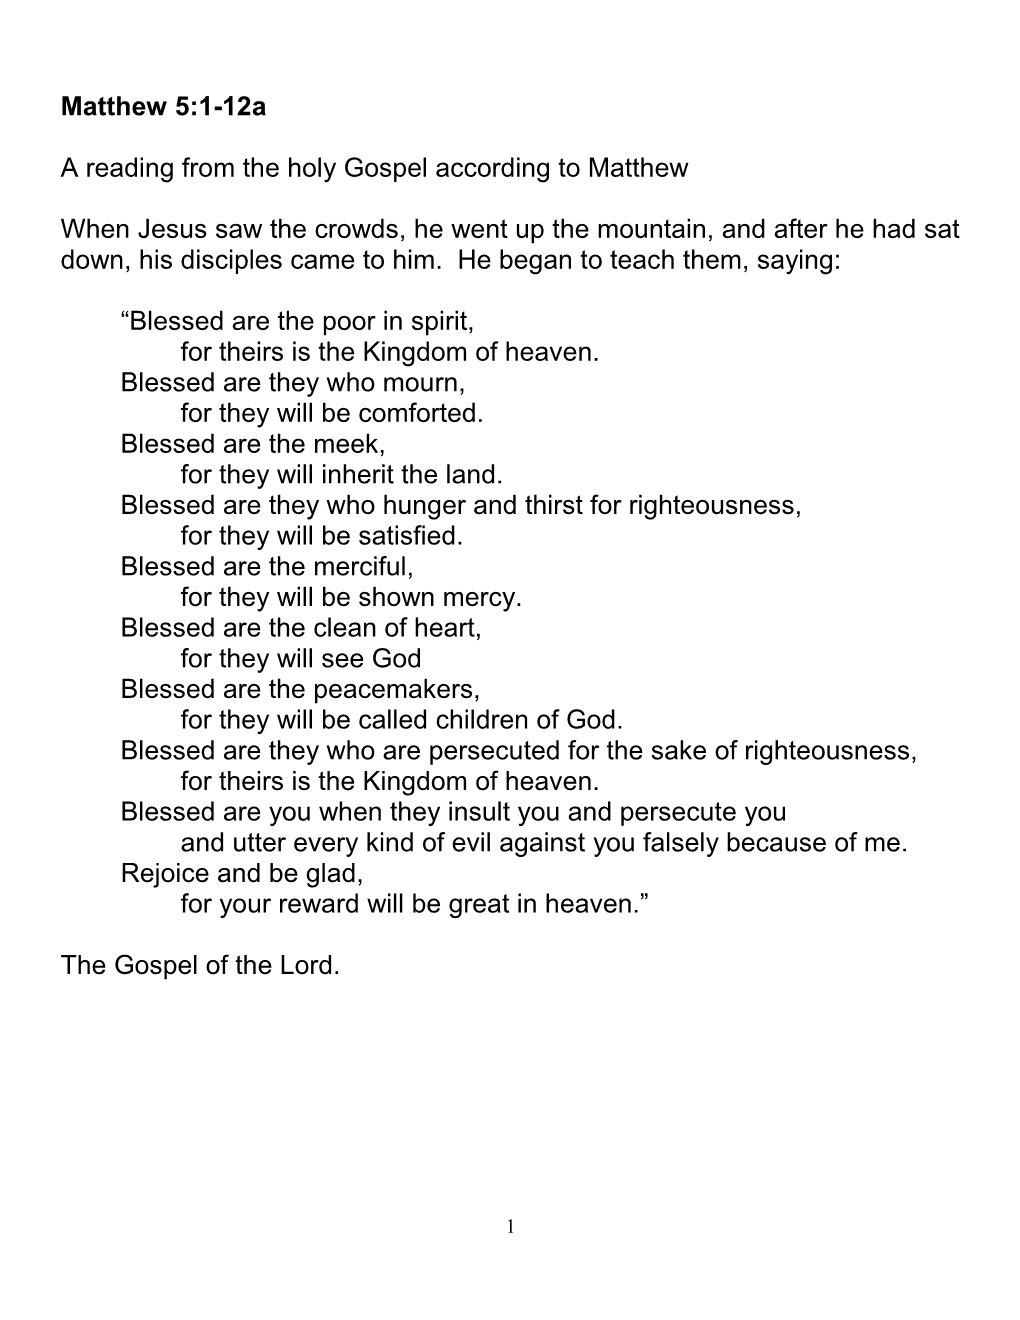 Matthew 5:1-12A a Reading from the Holy Gospel According to Matthew